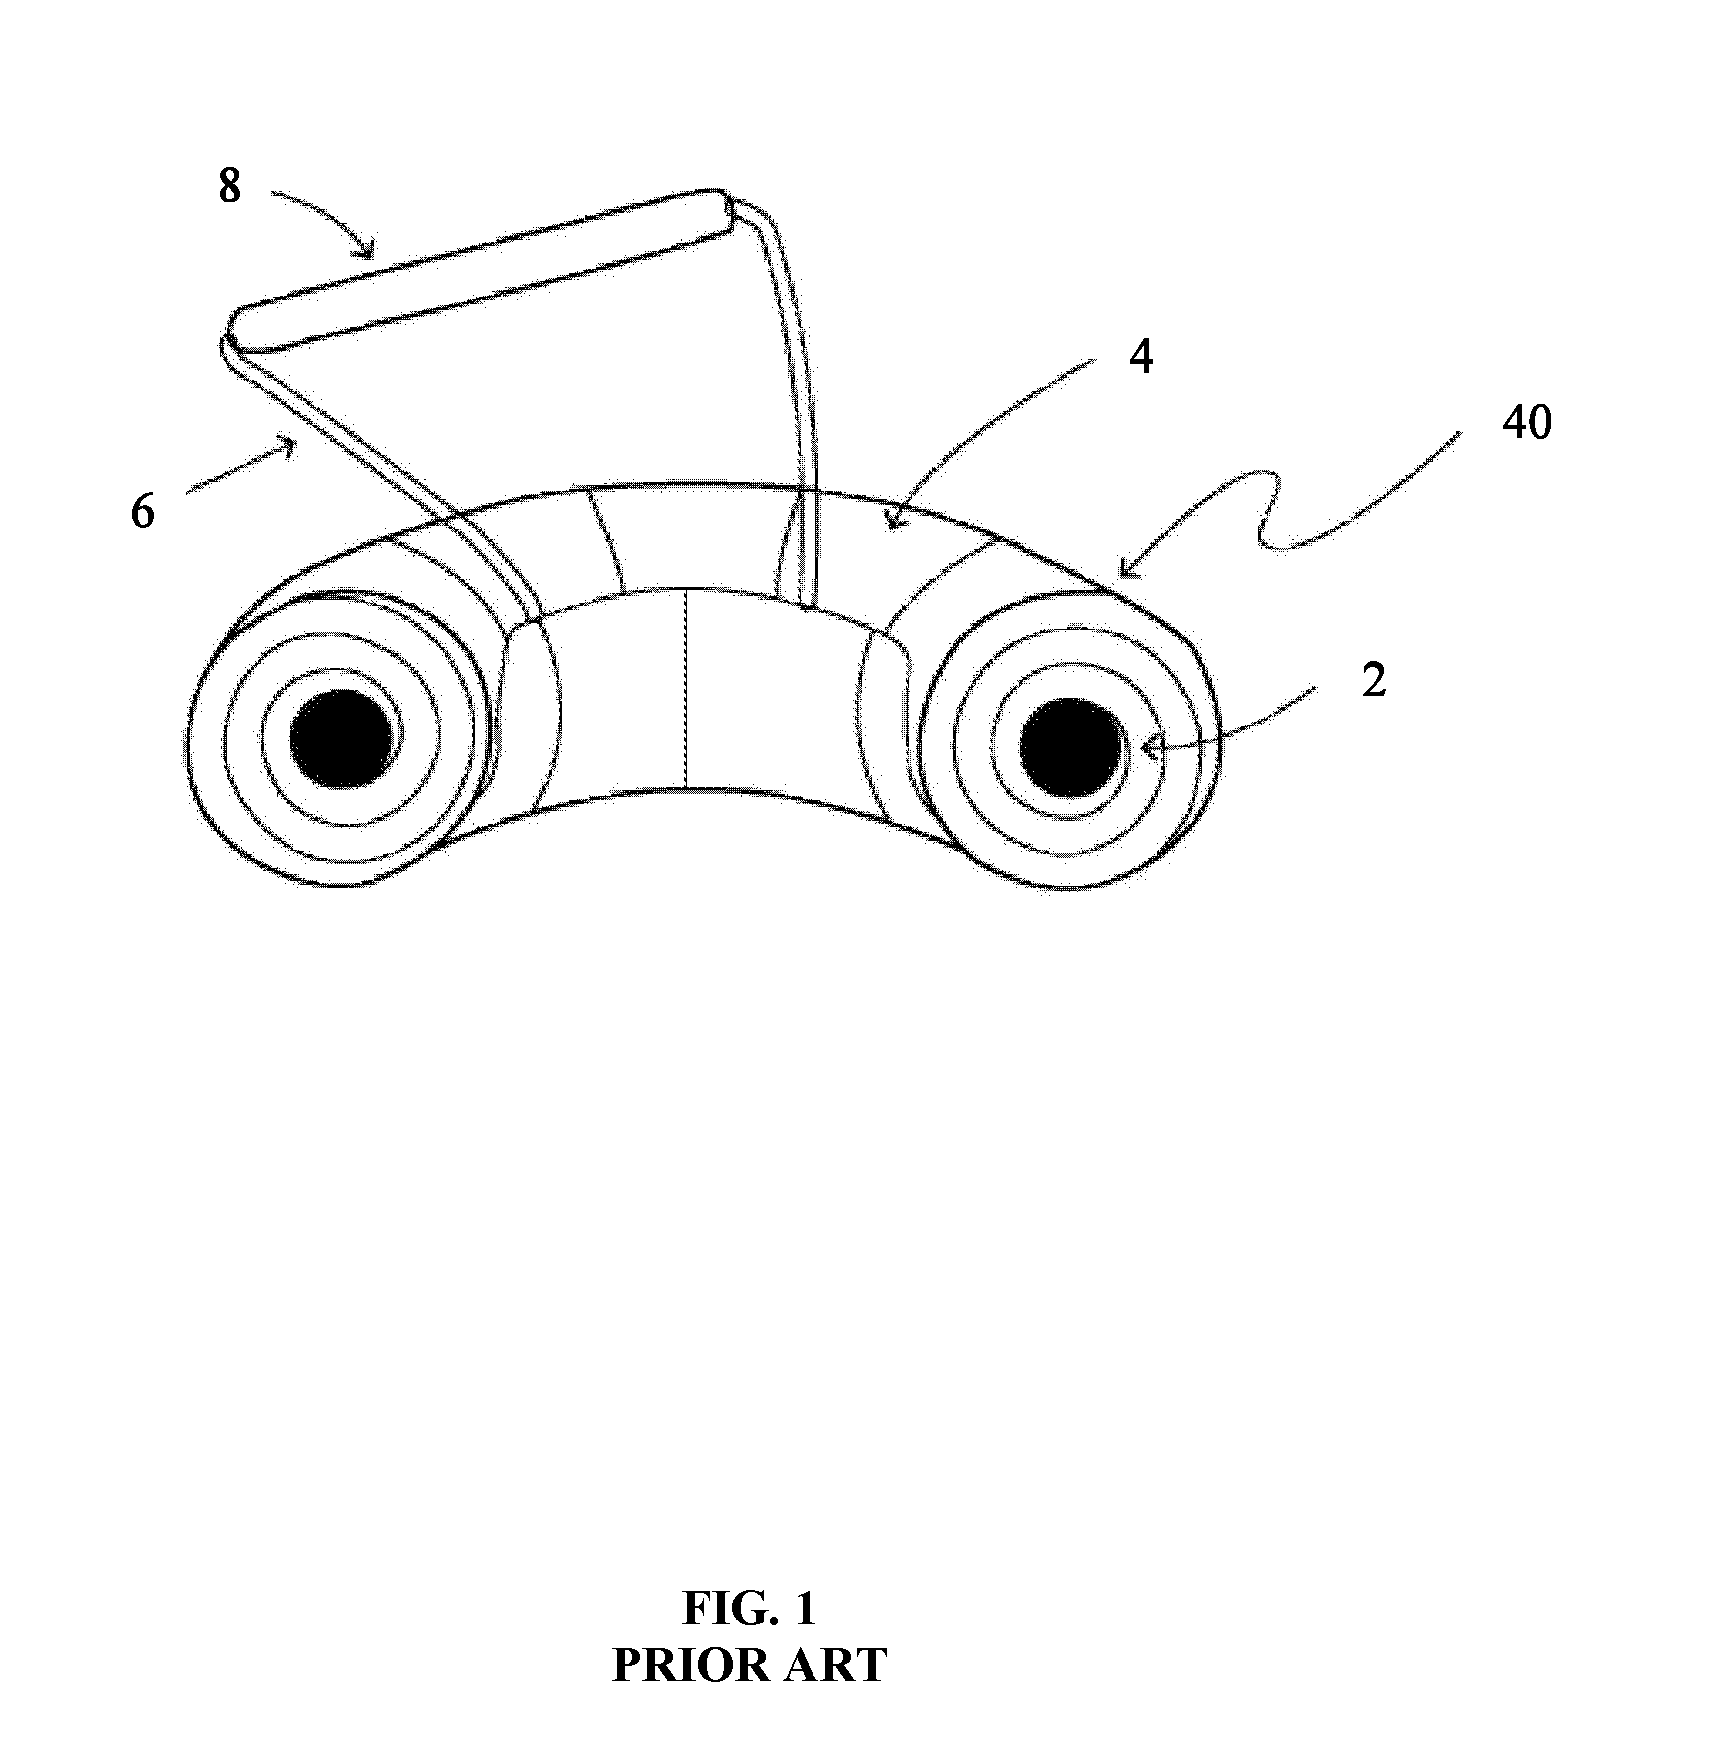 Applicator device and method of use for exsanguination tourniquet